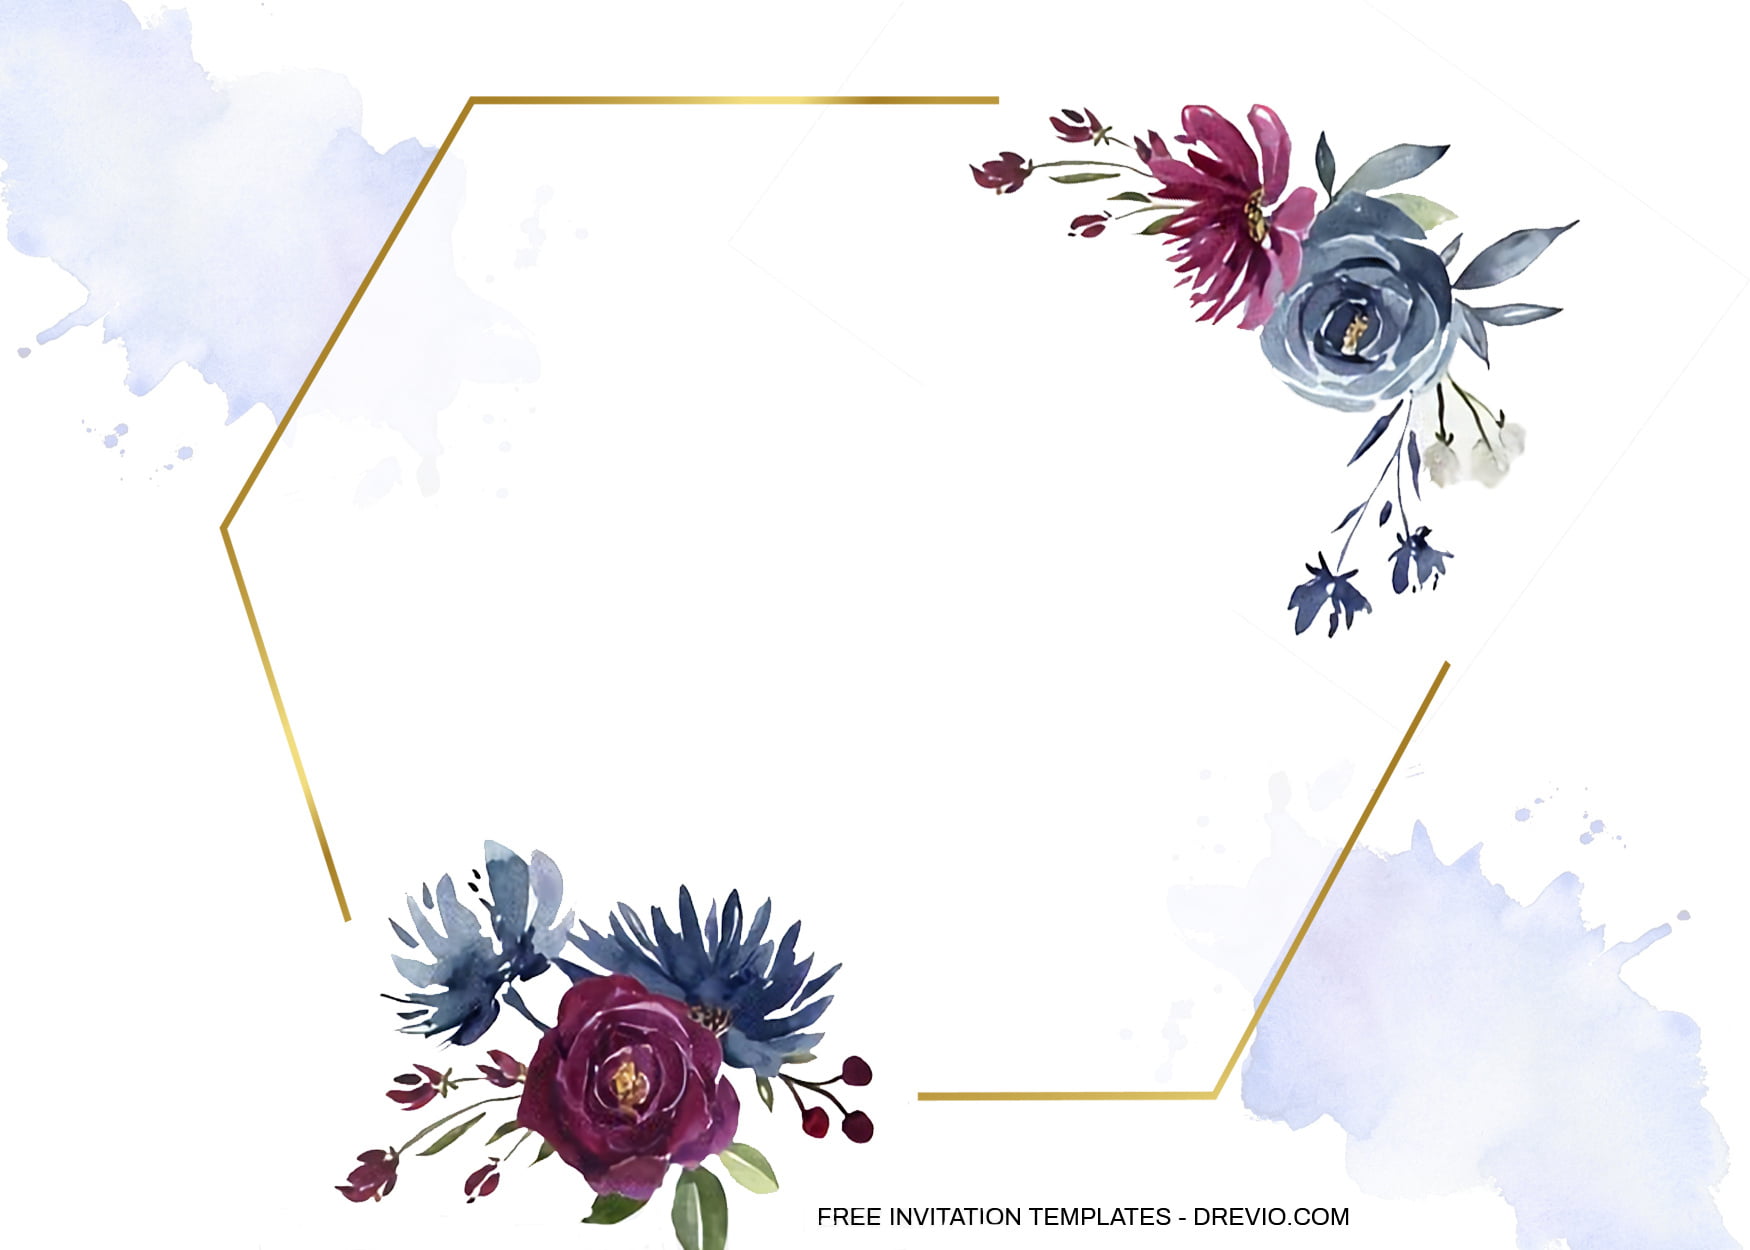 7+ Navy And Burgundy Floral Frame Invitation Templates